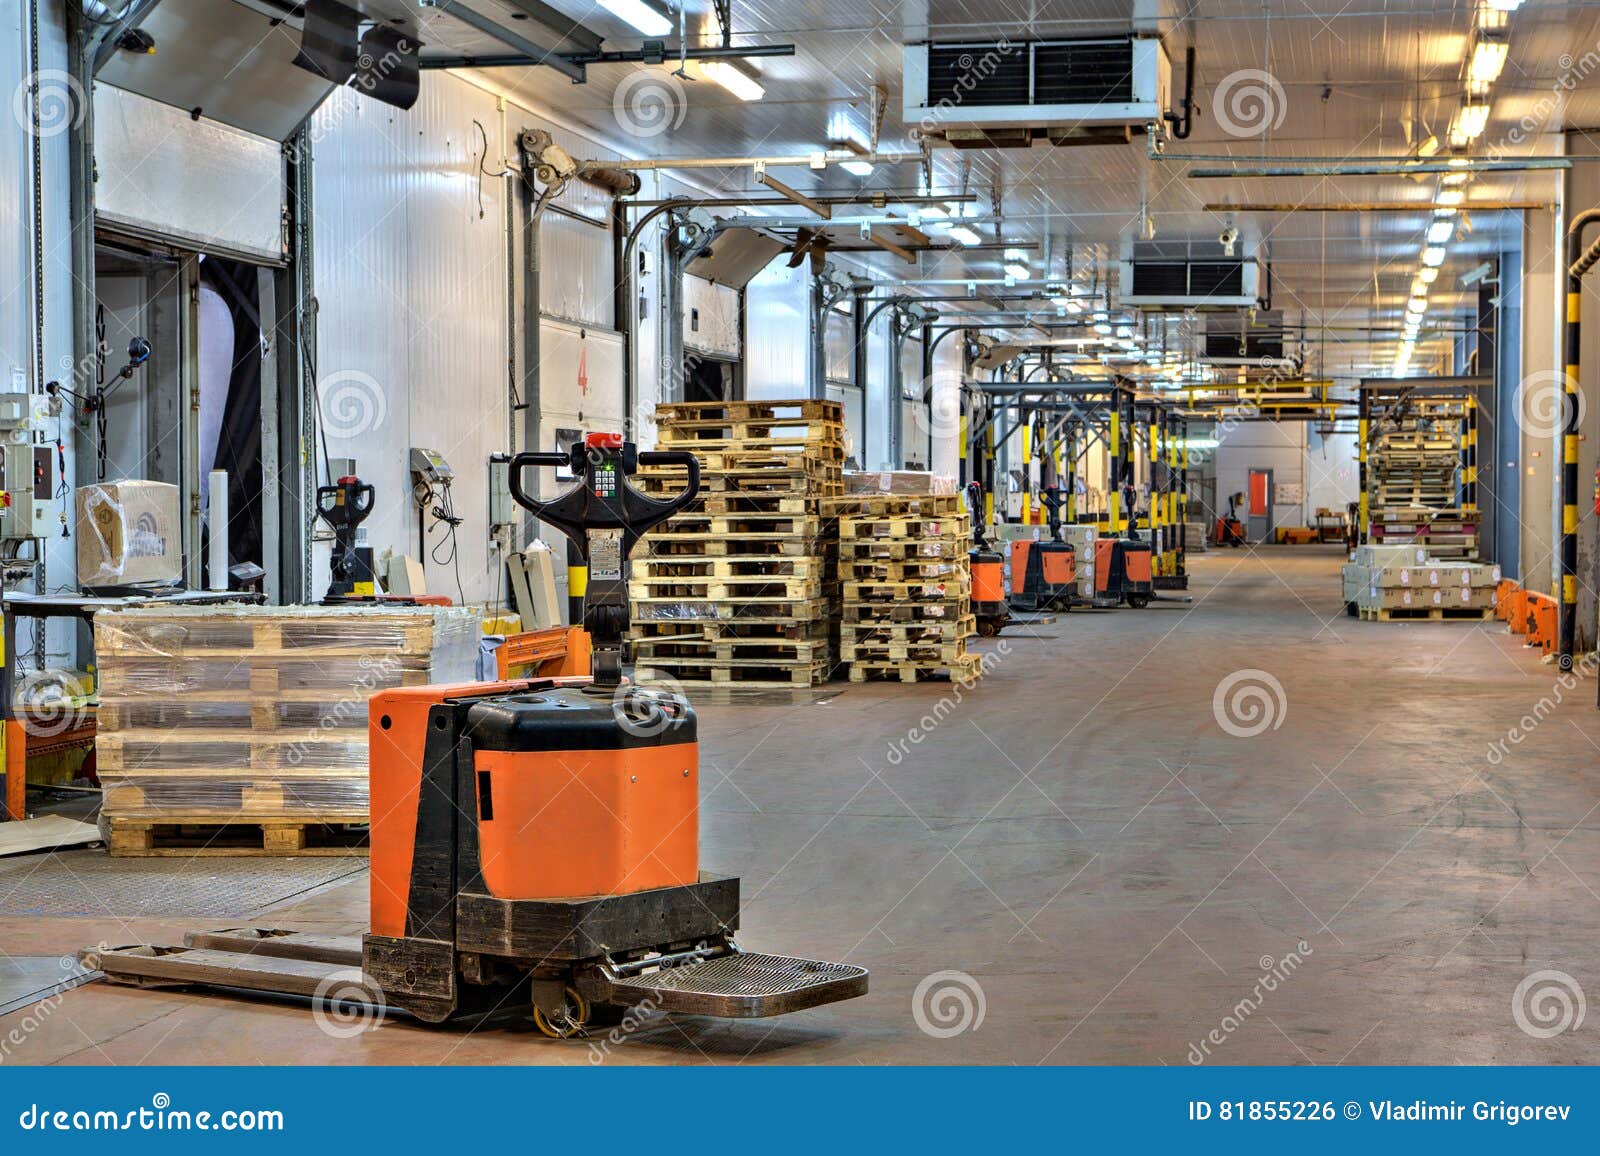 Forklifts Pallet Truck In Loading Dock Inside Cold Storage Wa Editorial Photo Image Of Repository Loader 81855226